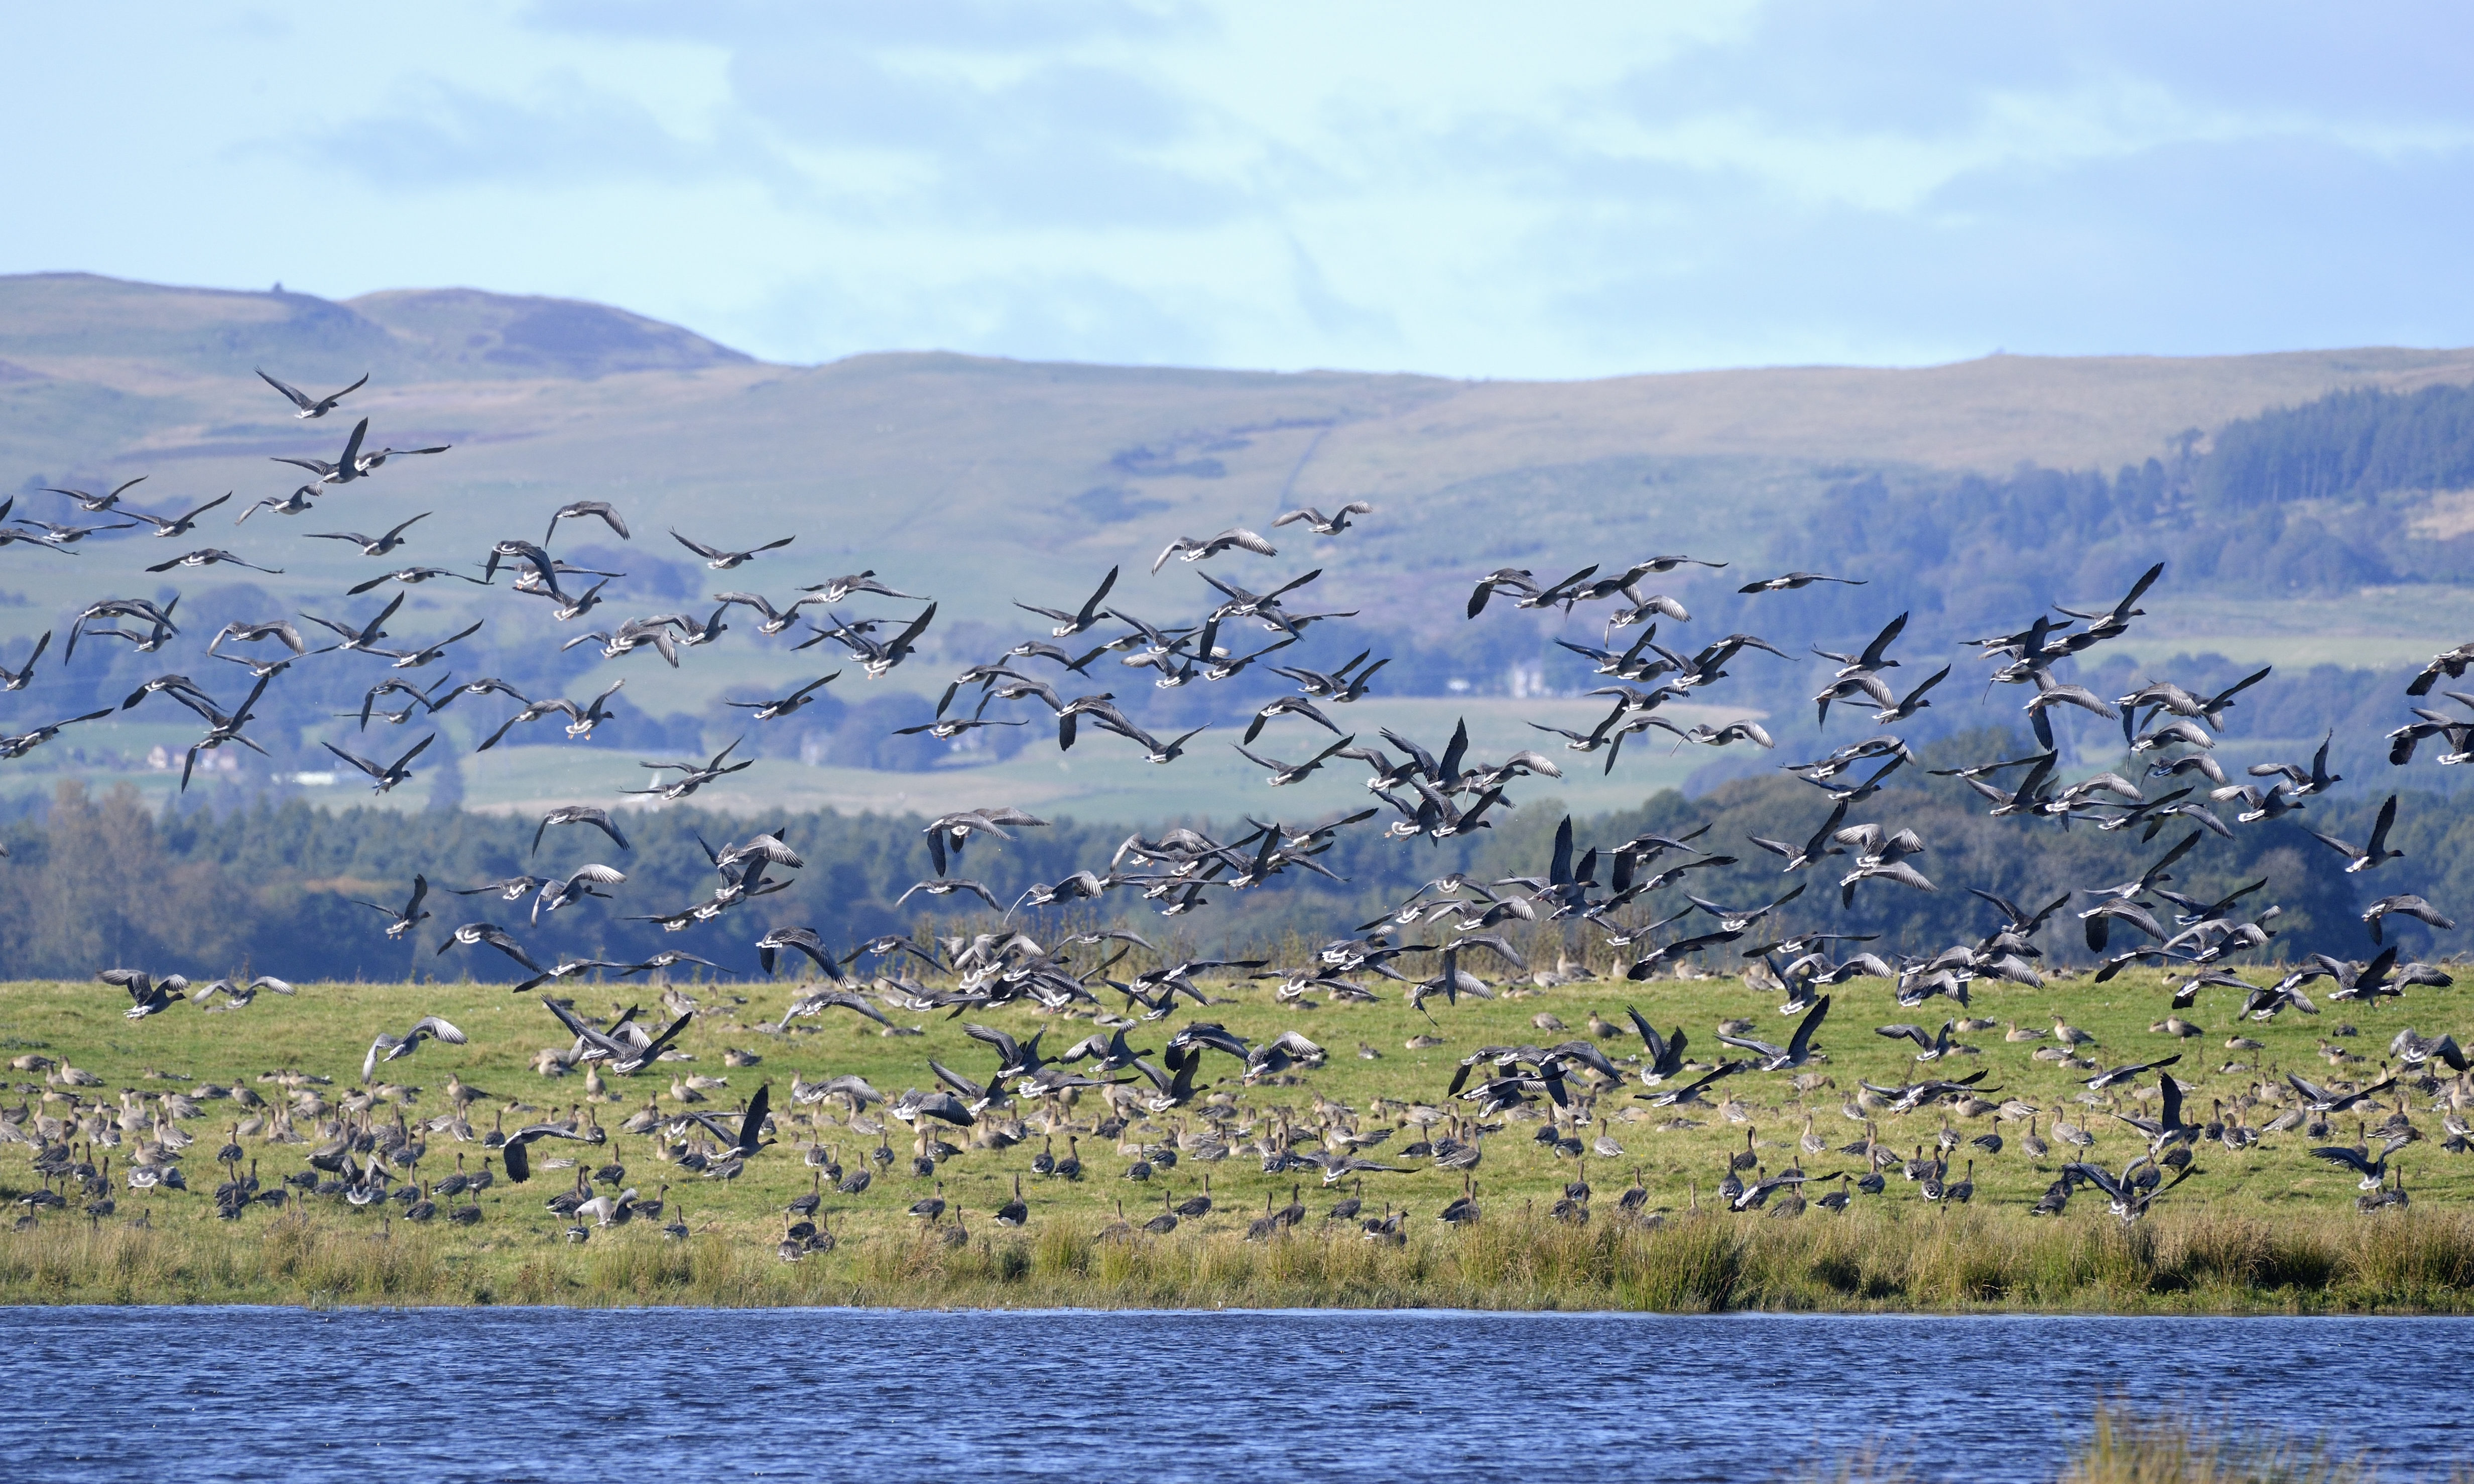 Pink-footed geese can be seen at Loch Leven.